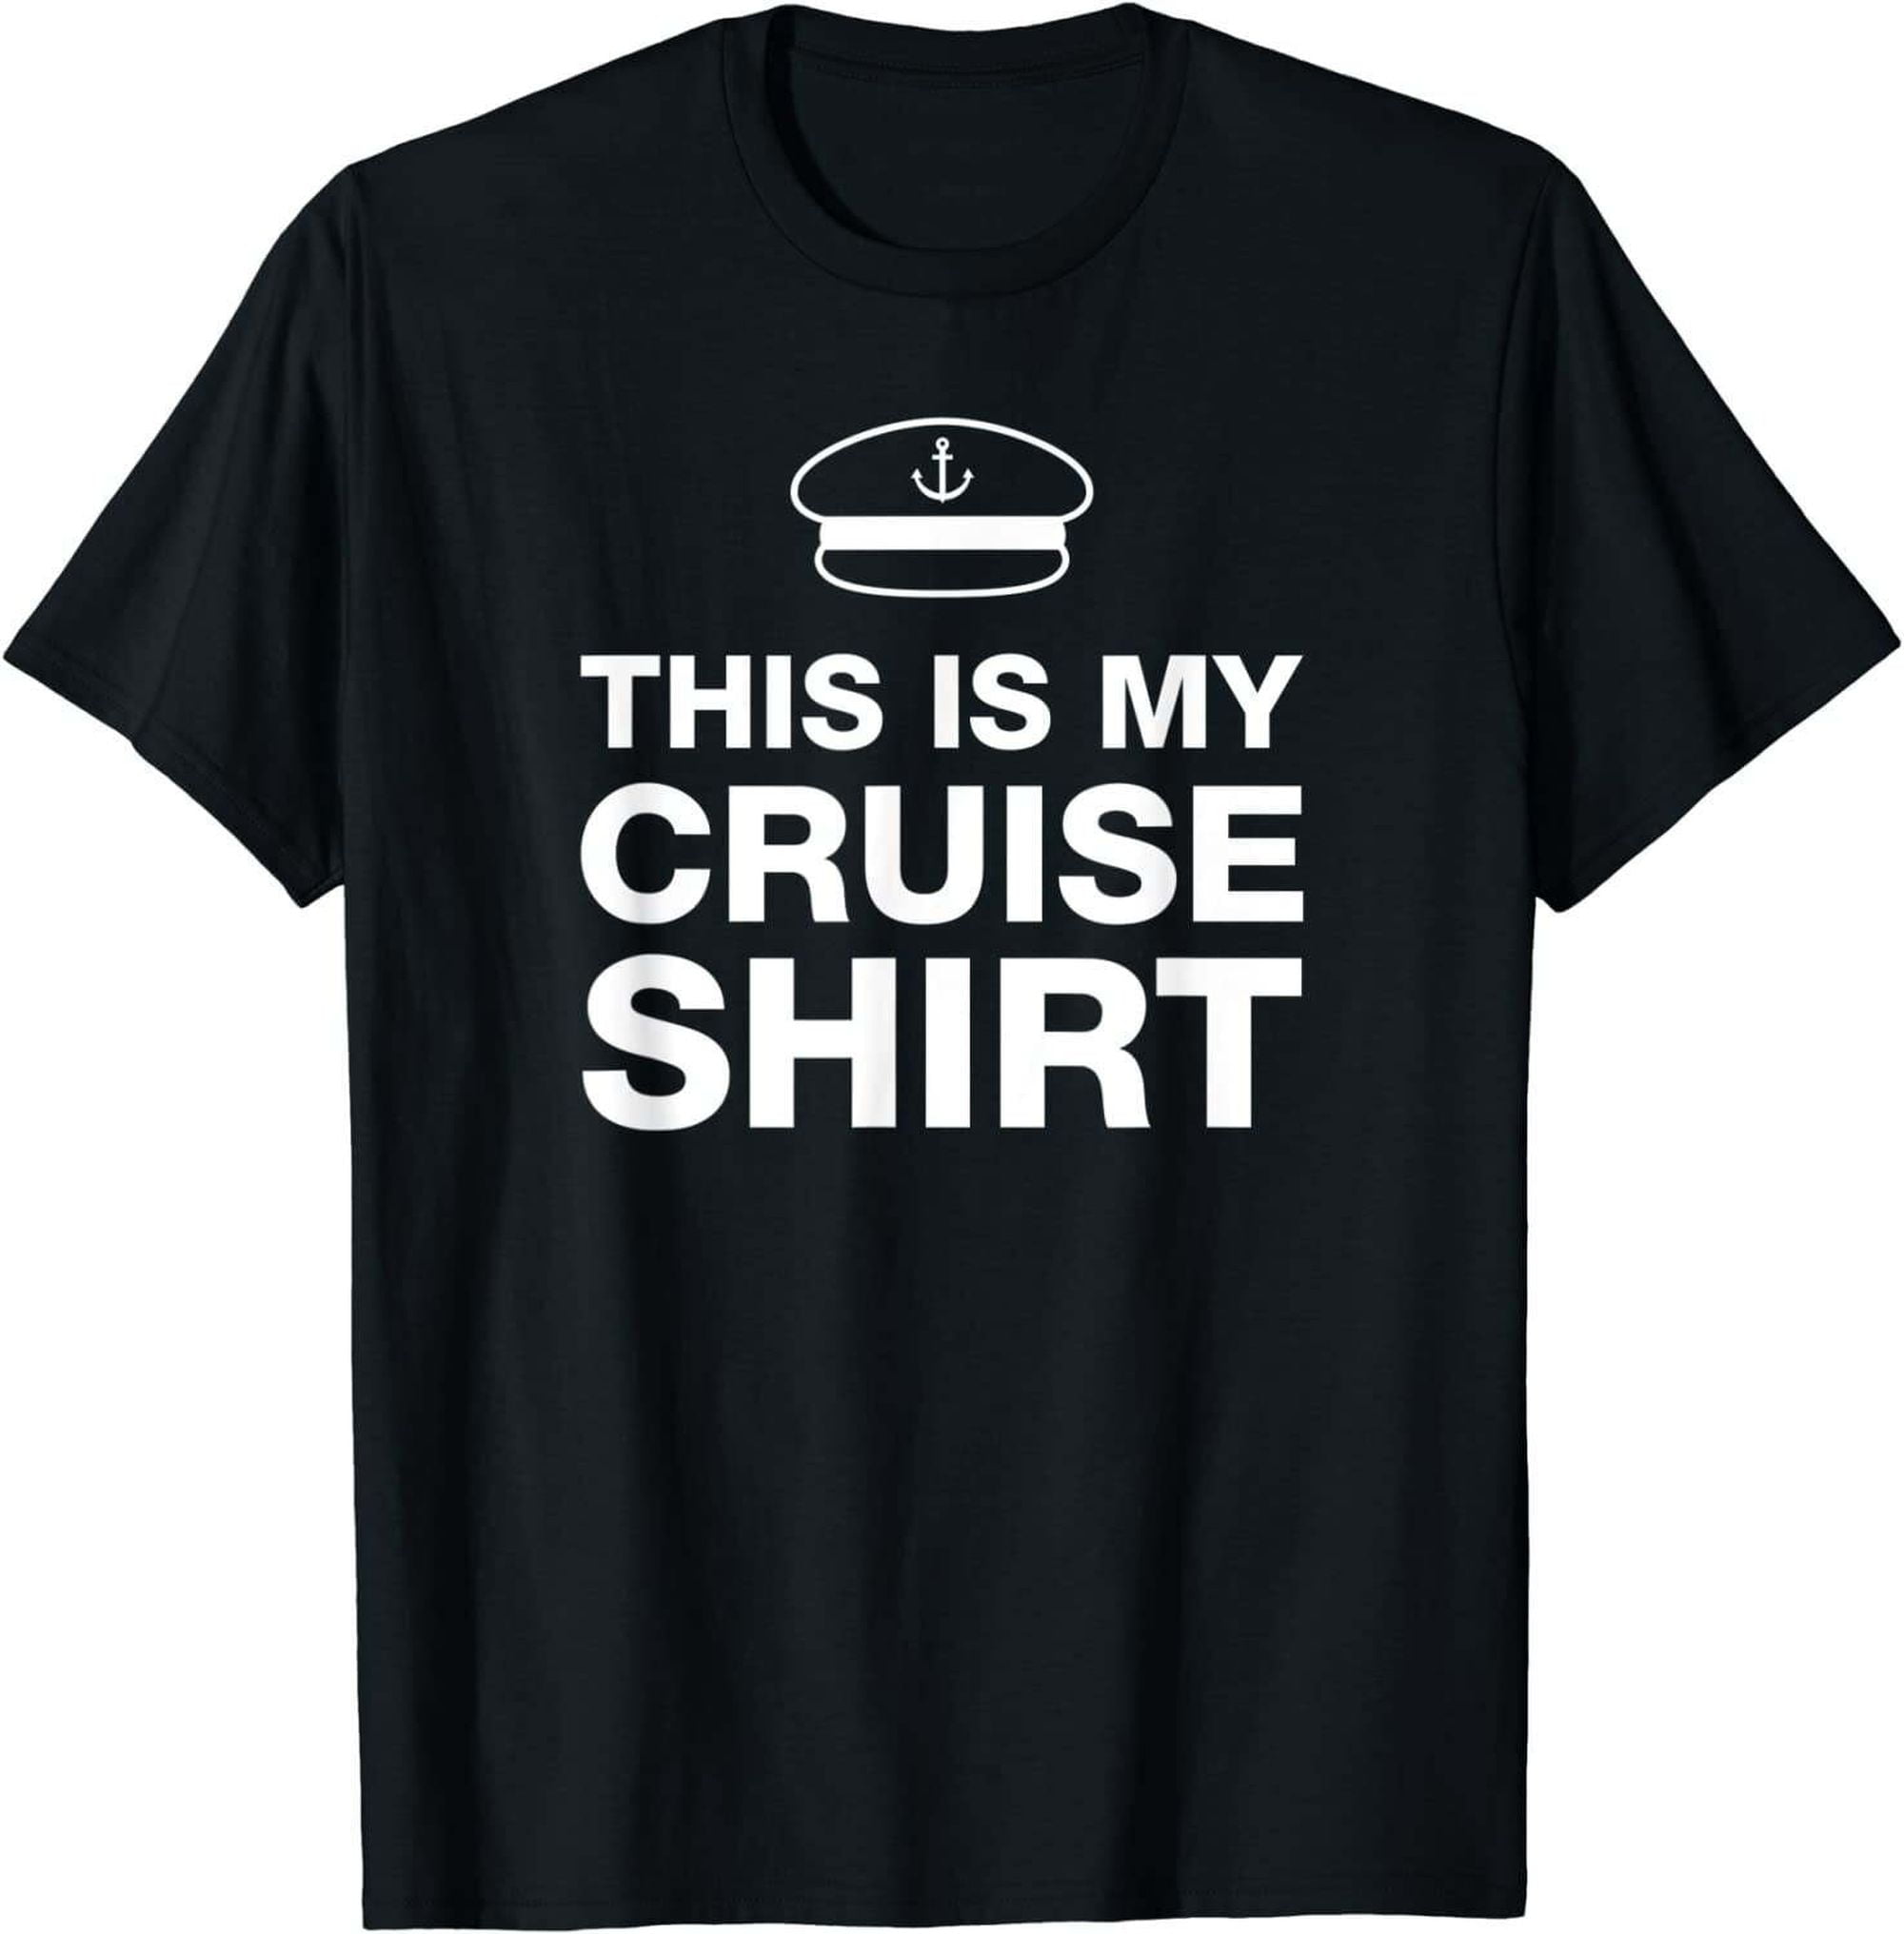 Hilarious Cruise Shirt: Uniquely Funny Novelty Tee for Memorable ...